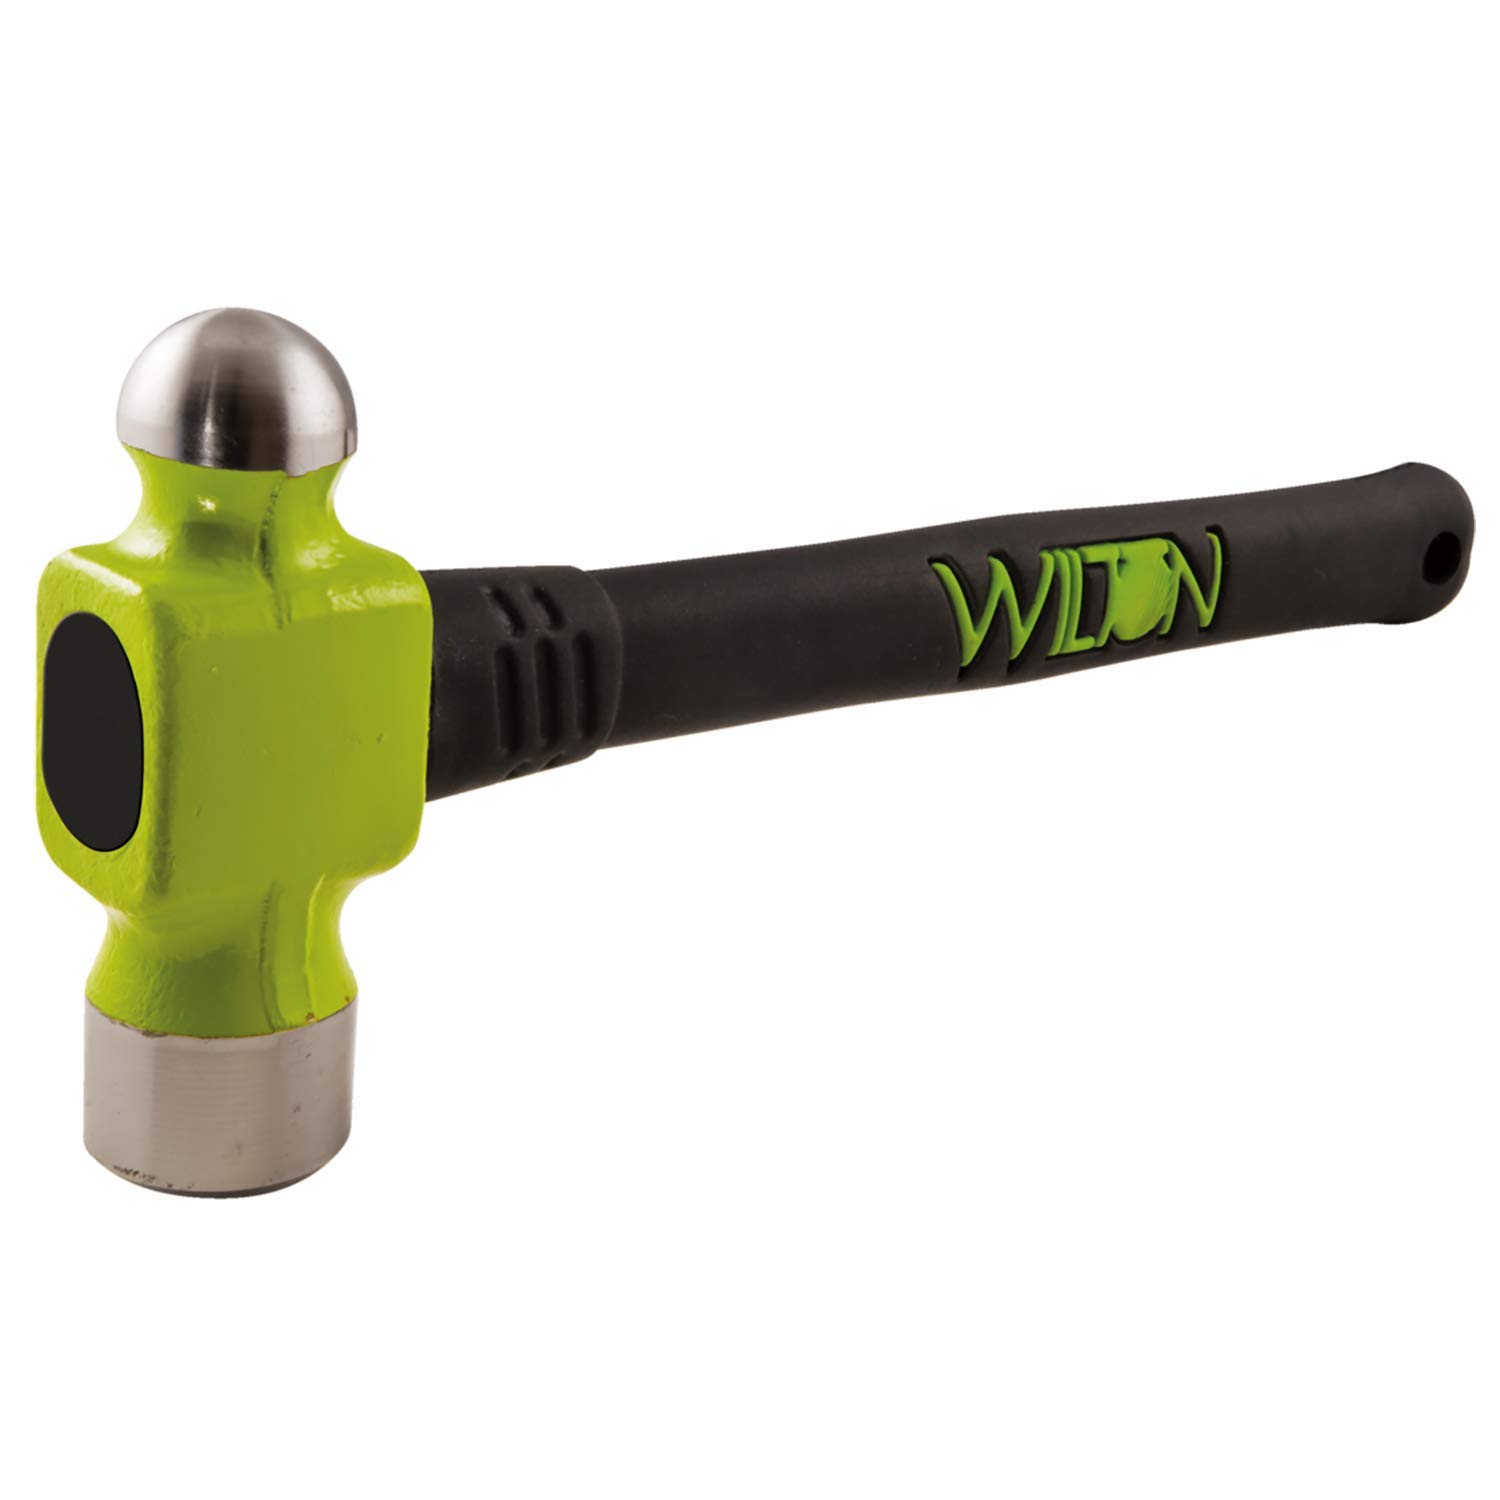 Wilton WIL33214 32 Oz Bash Ball Pein Hammer with 14 in. Unbreakable Handle並行輸入品